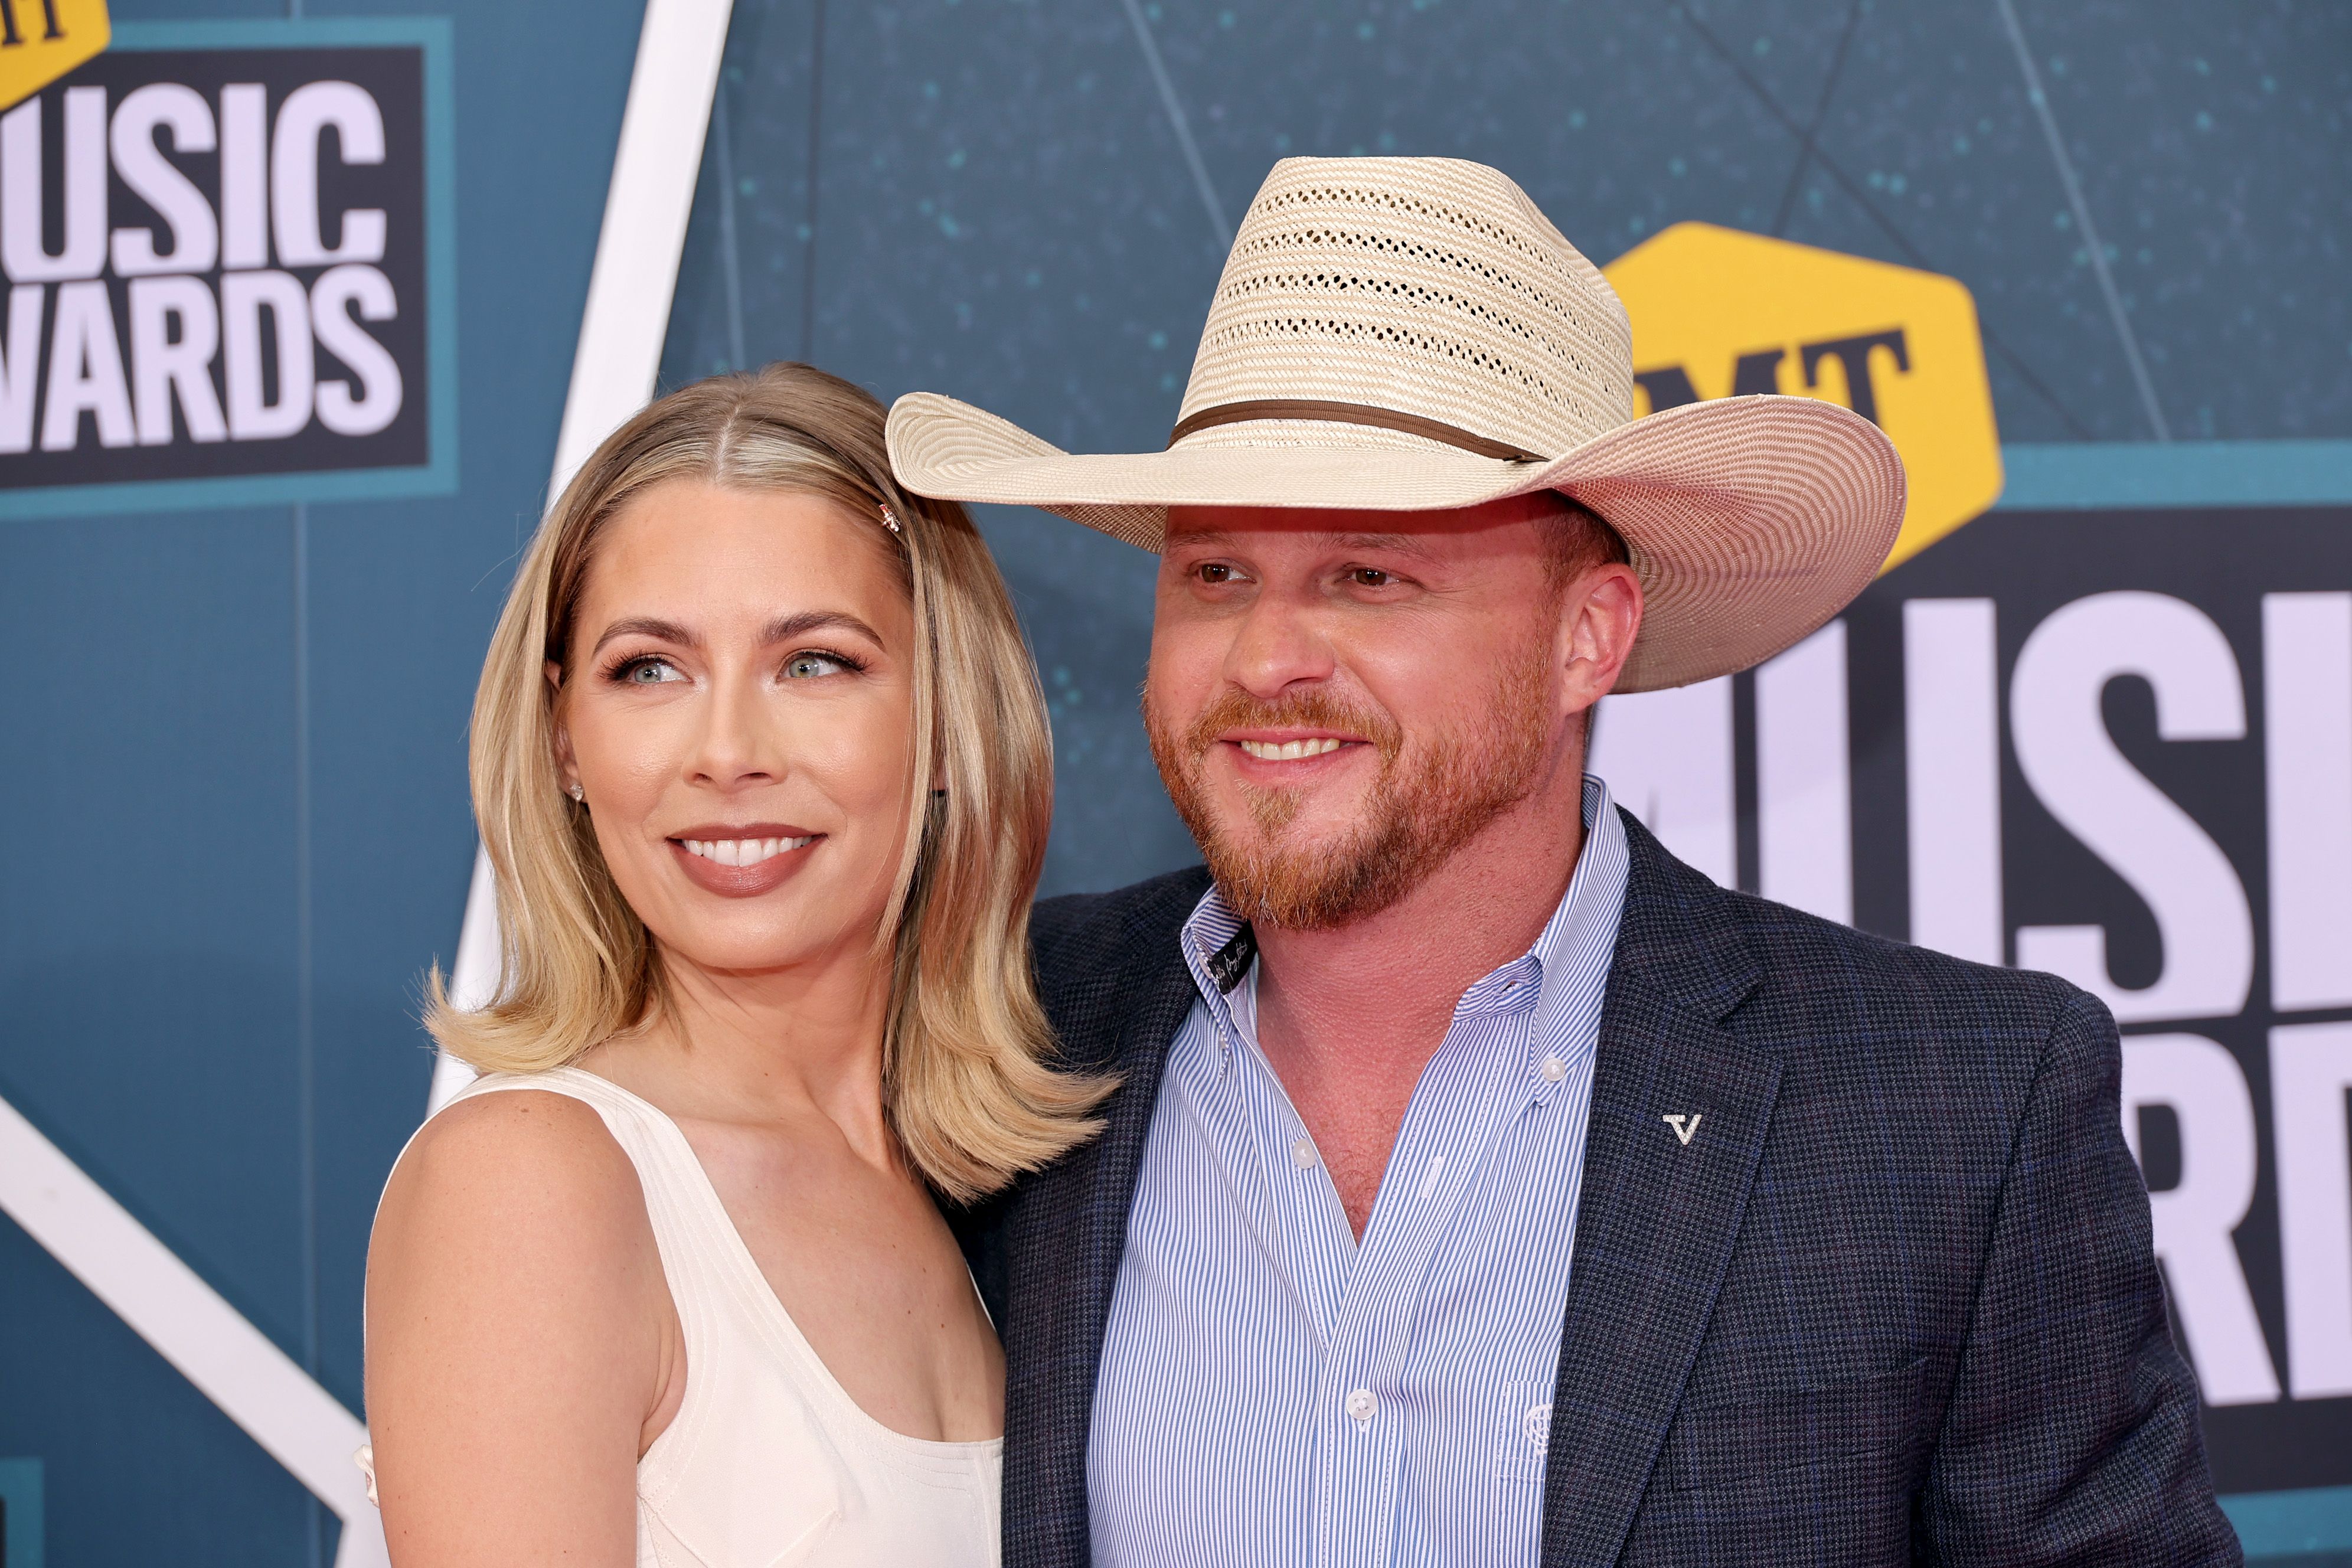 Brandi Johnson and Cody Johnson during the 2022 CMT Music Awards at Nashville Municipal Auditorium on April 11, 2022, in Nashville, Tennessee. | Source: Getty Images